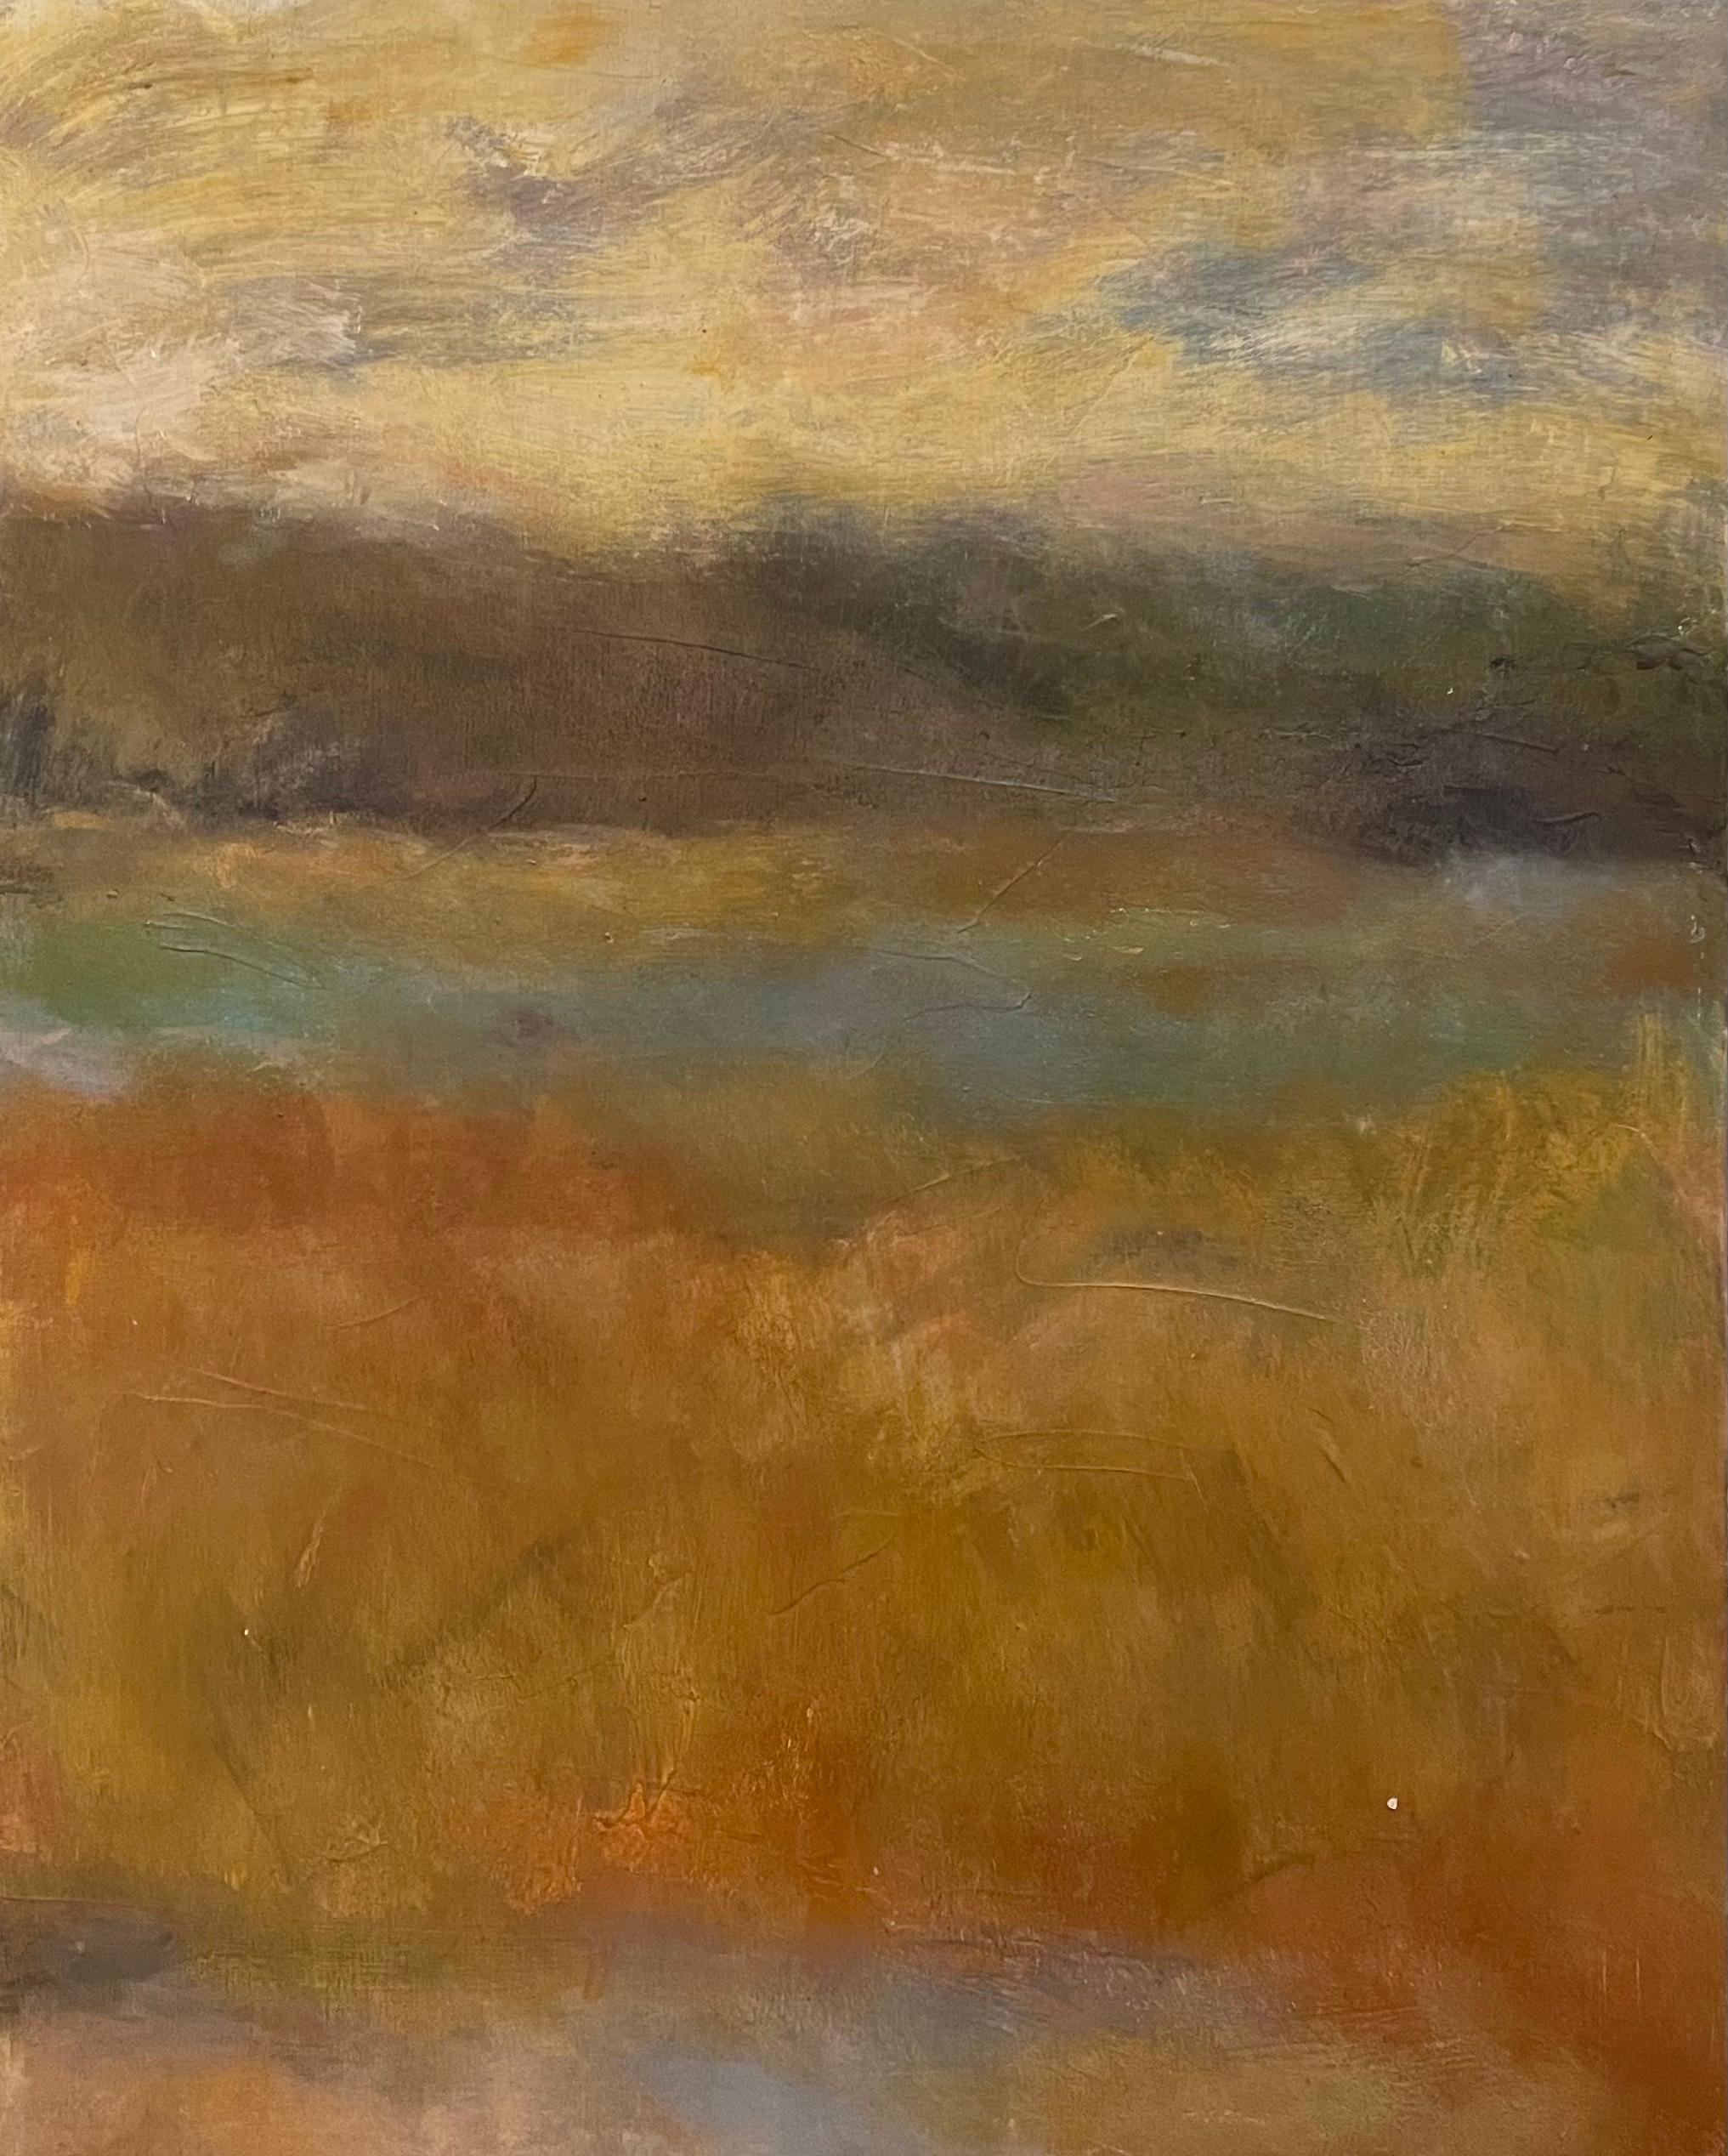 Helen Steele Landscape Painting - "A Little Sunshine" Mixed Media Landscape Abstract Expressionist